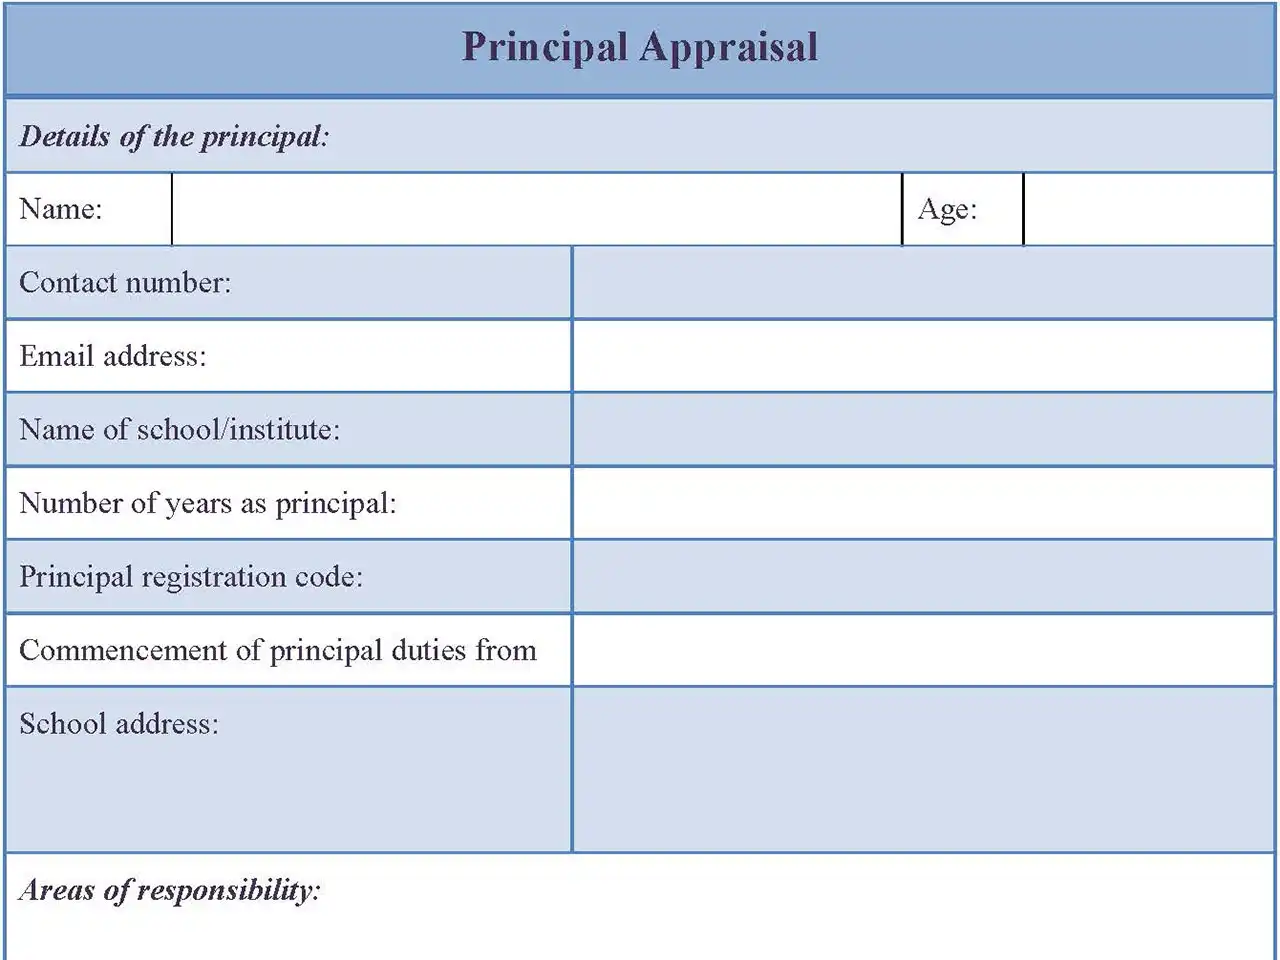 Principal Appraisal Fillable PDF Form And Word Document